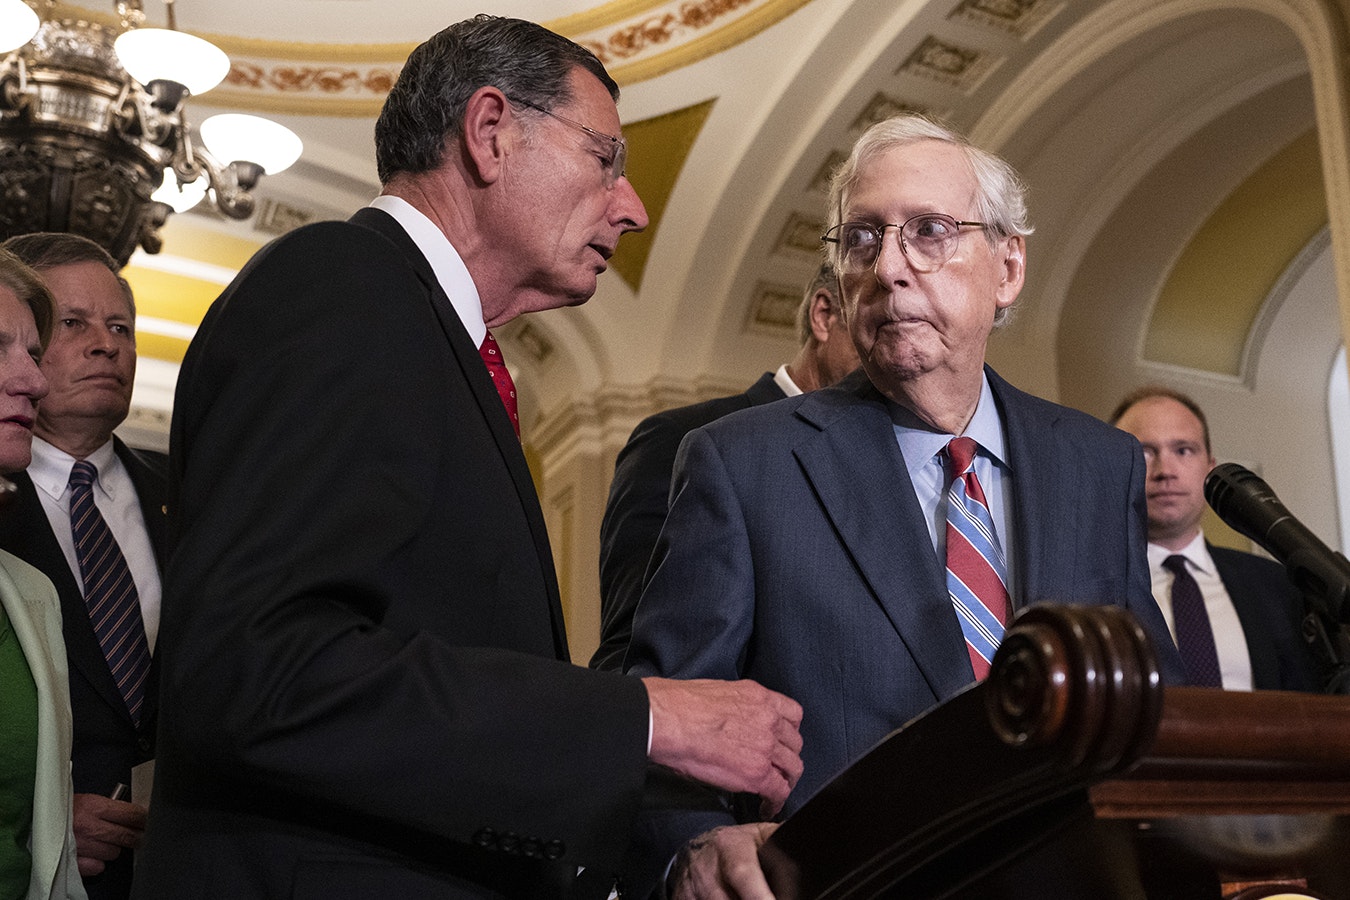 U.S. Sens. John Barrasso, R-Wyoming, left, and Mitch McConnell, R-Kentucky.